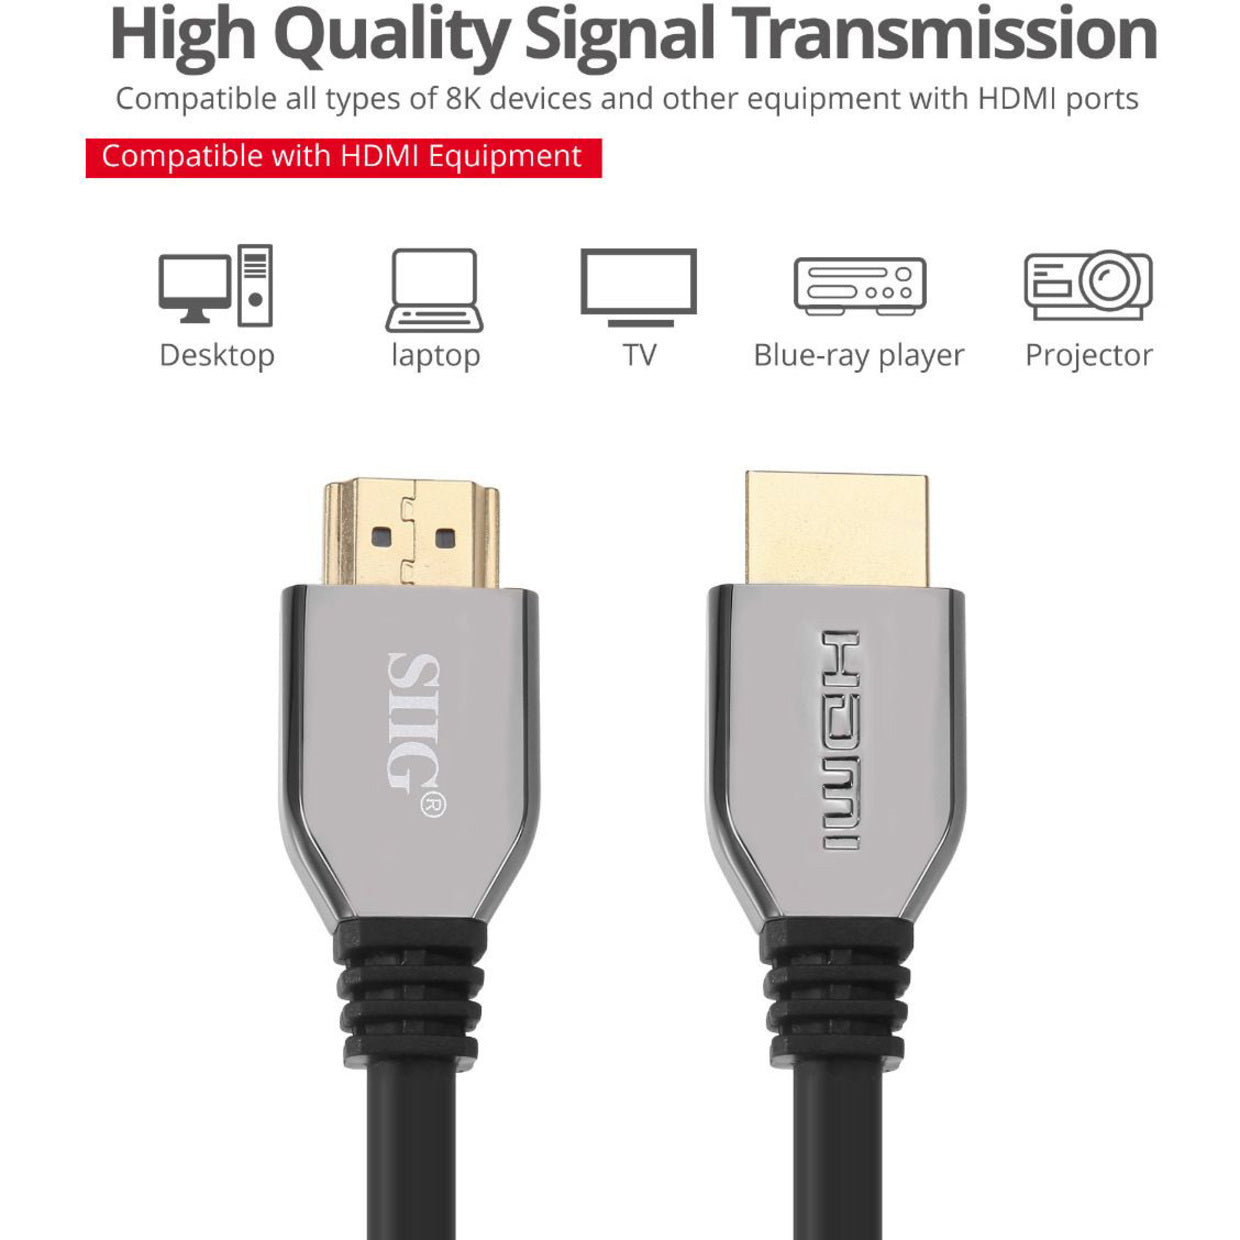 SIIG CB-H21411-S1 8K Ultra High Speed HDMI Cable - 3.3ft, HDCP 2.2, EMI/RF Protection, Gold Plated Connectors